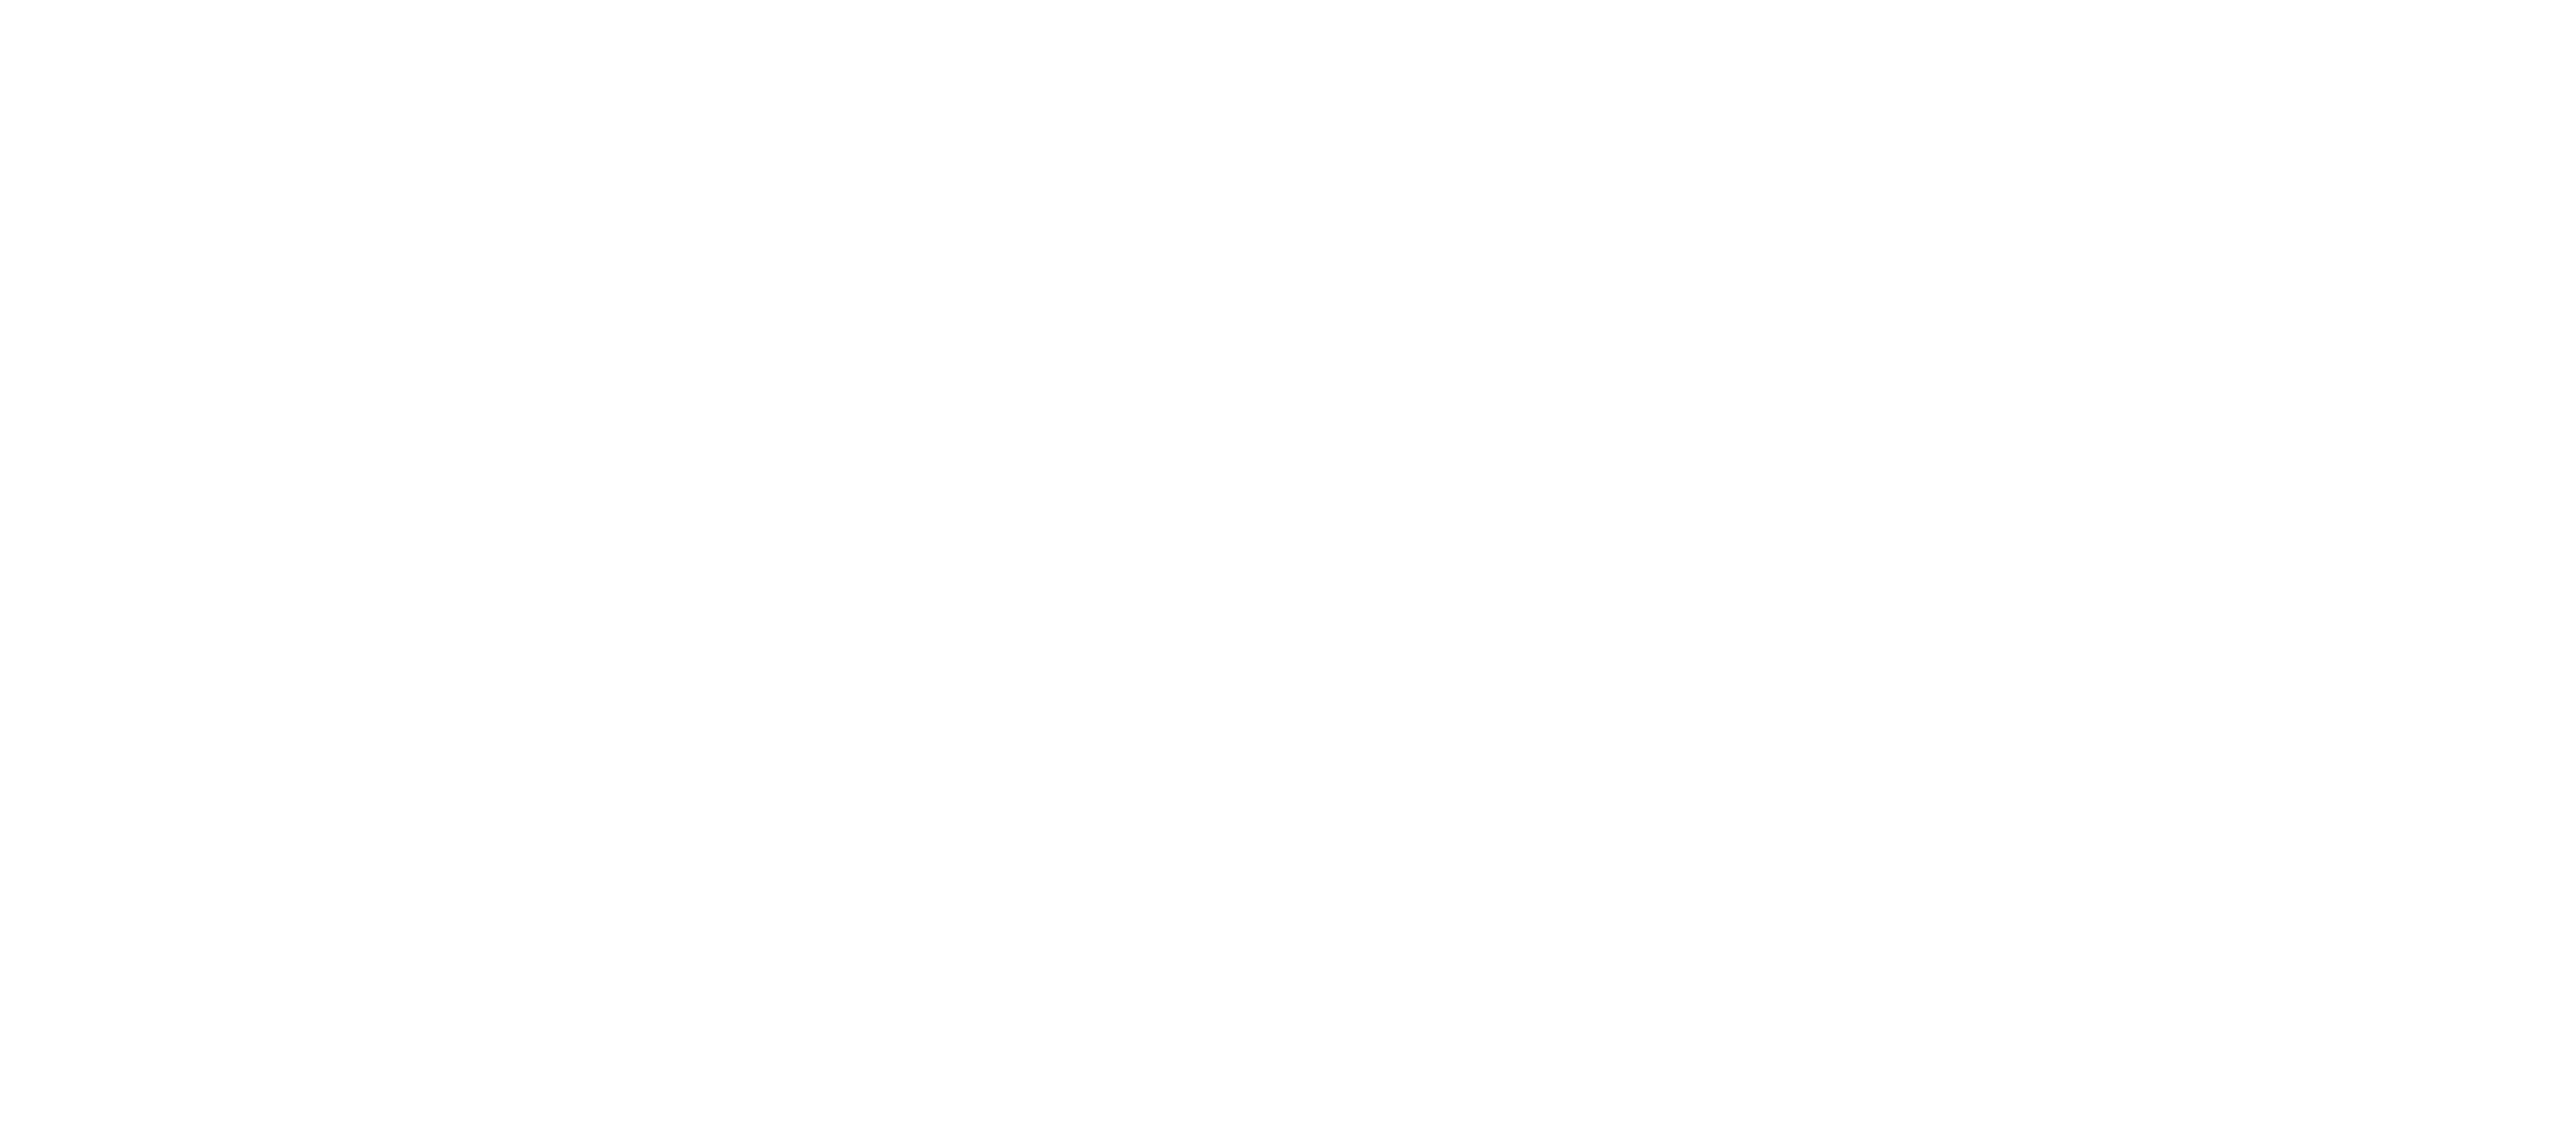 Floor Covering Education Foundation | National Floorcovering Alliance